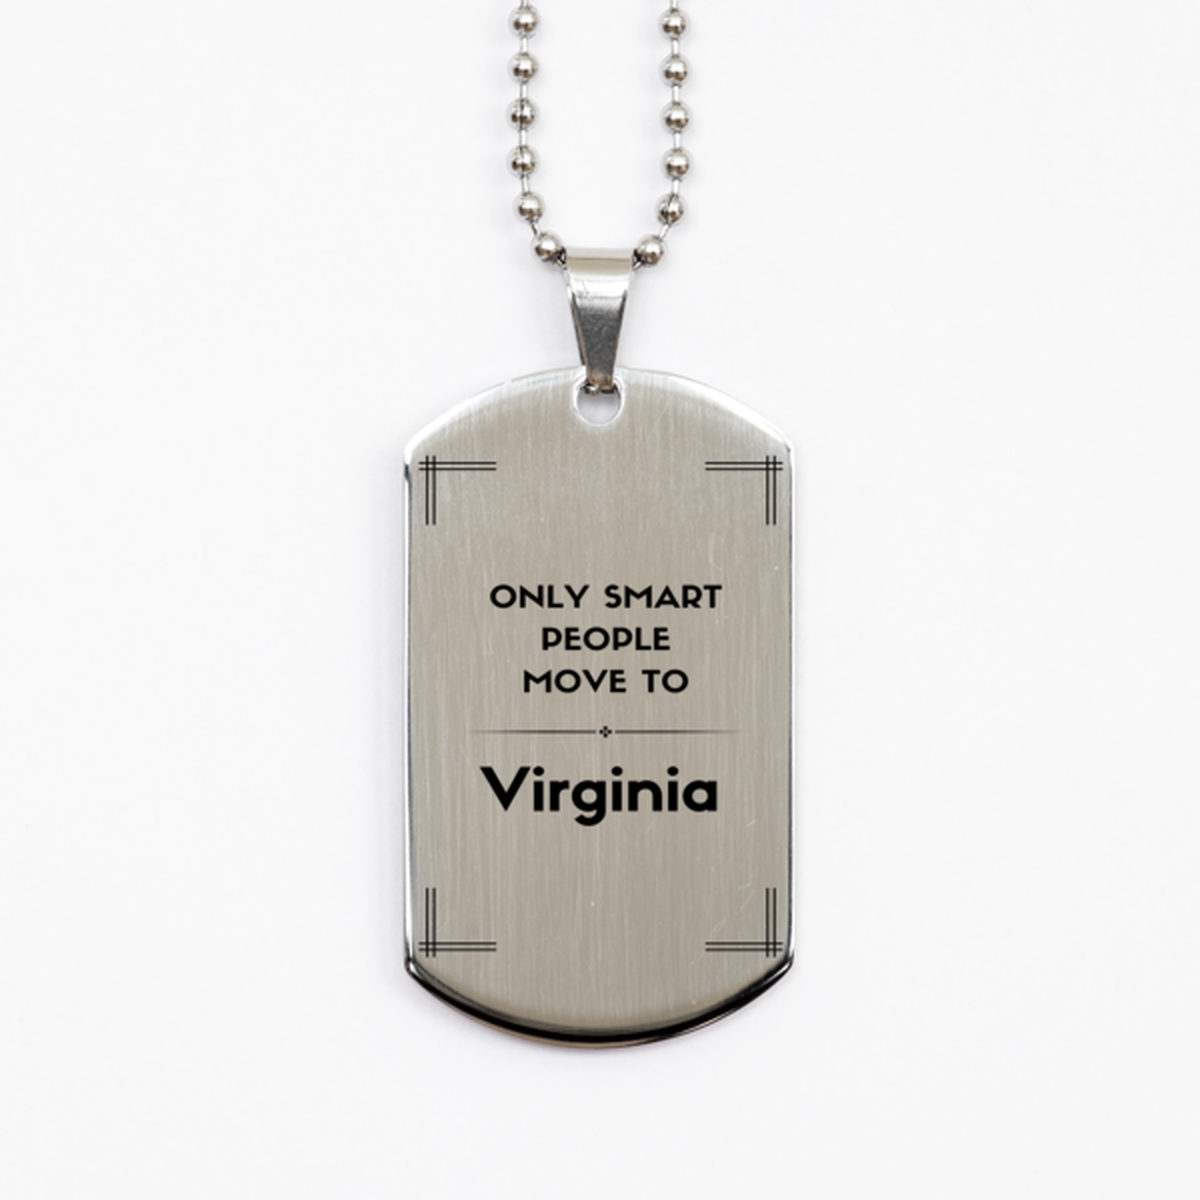 Only smart people move to Virginia Silver Dog Tag, Gag Gifts For Virginia, Move to Virginia Gifts for Friends Coworker Funny Saying Quote